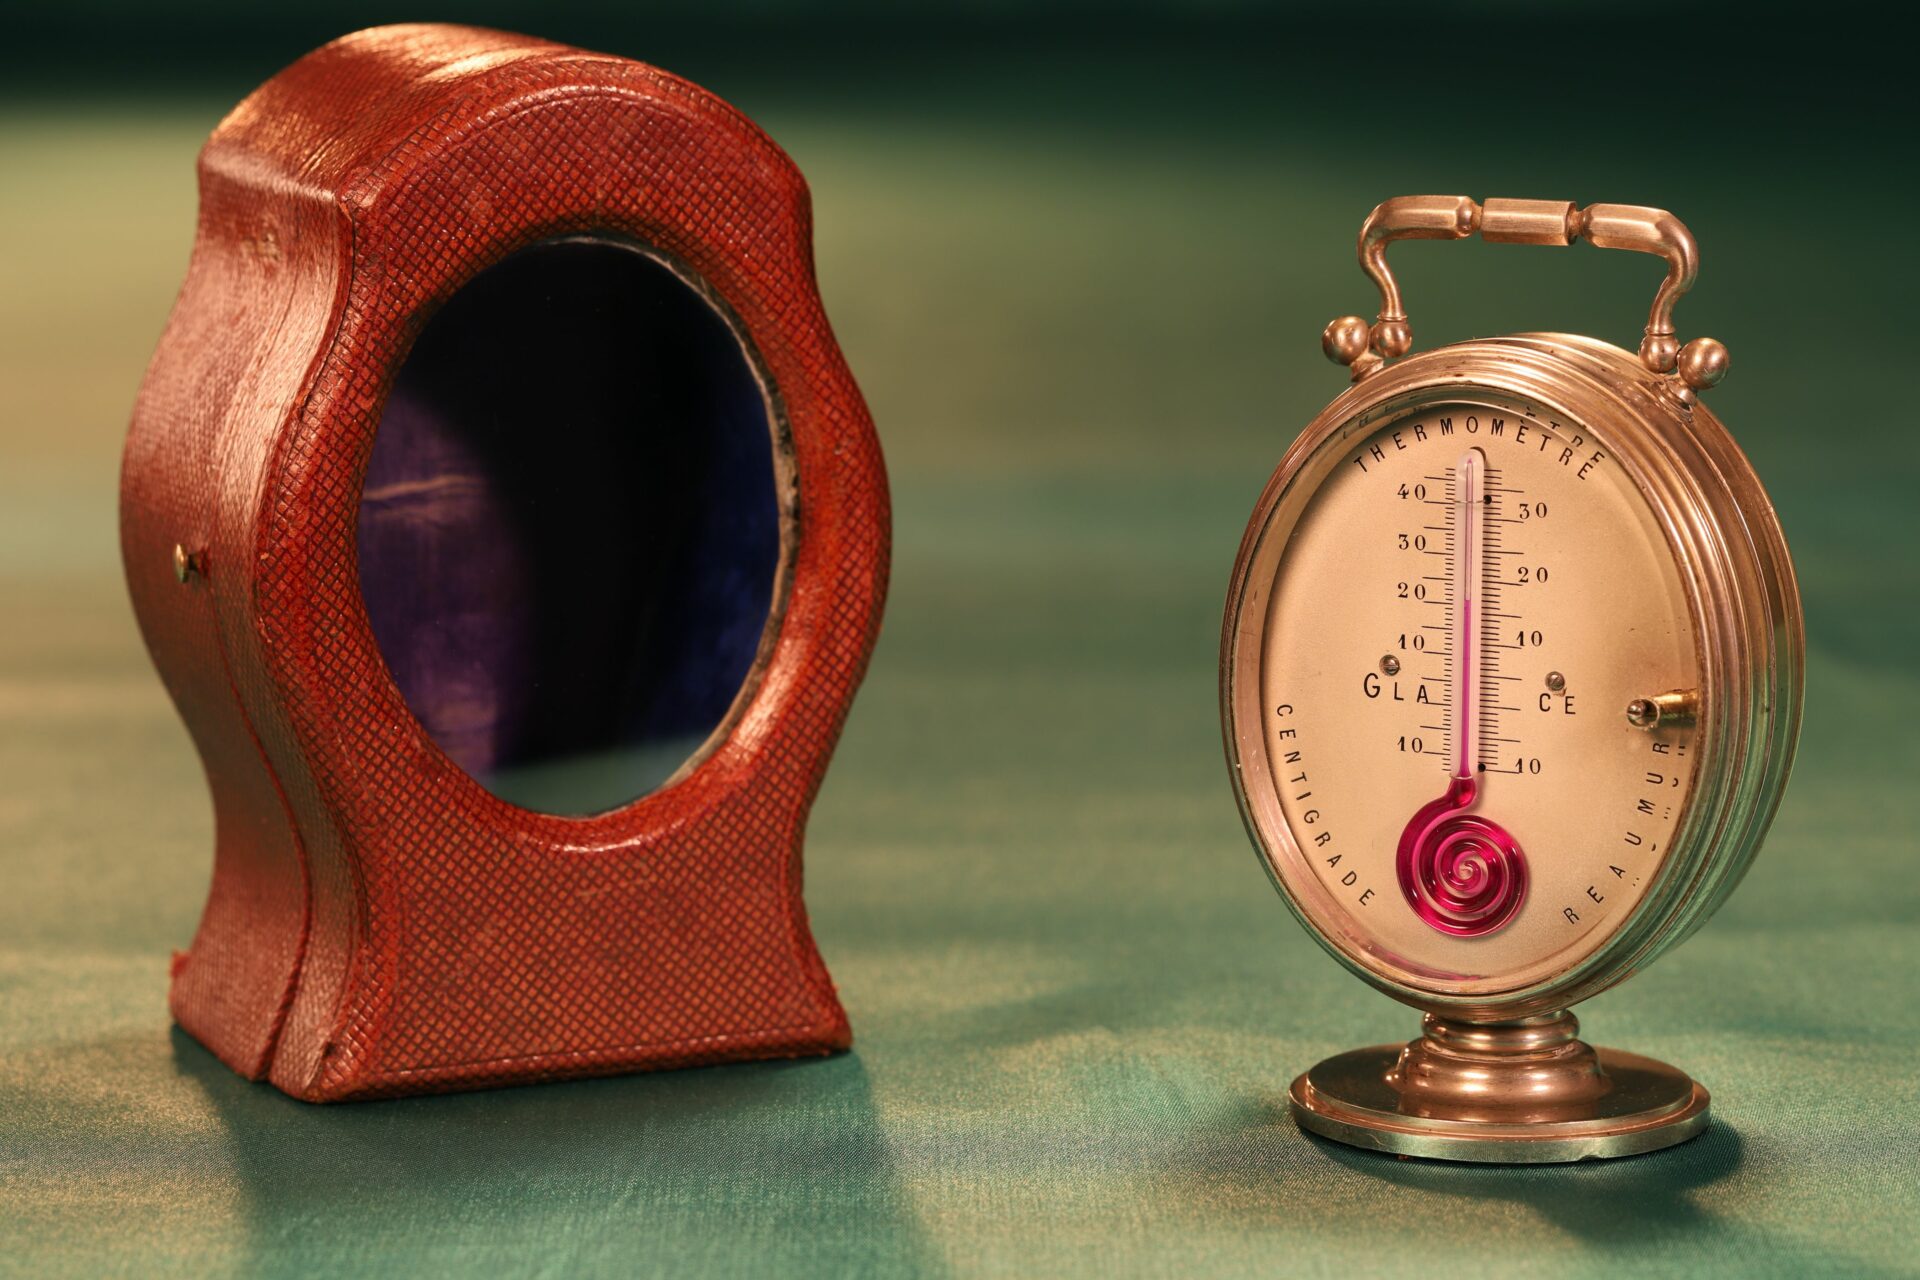 Image of Redier Travel Compendium showing the Thermometer and the Original Travel Case c1880